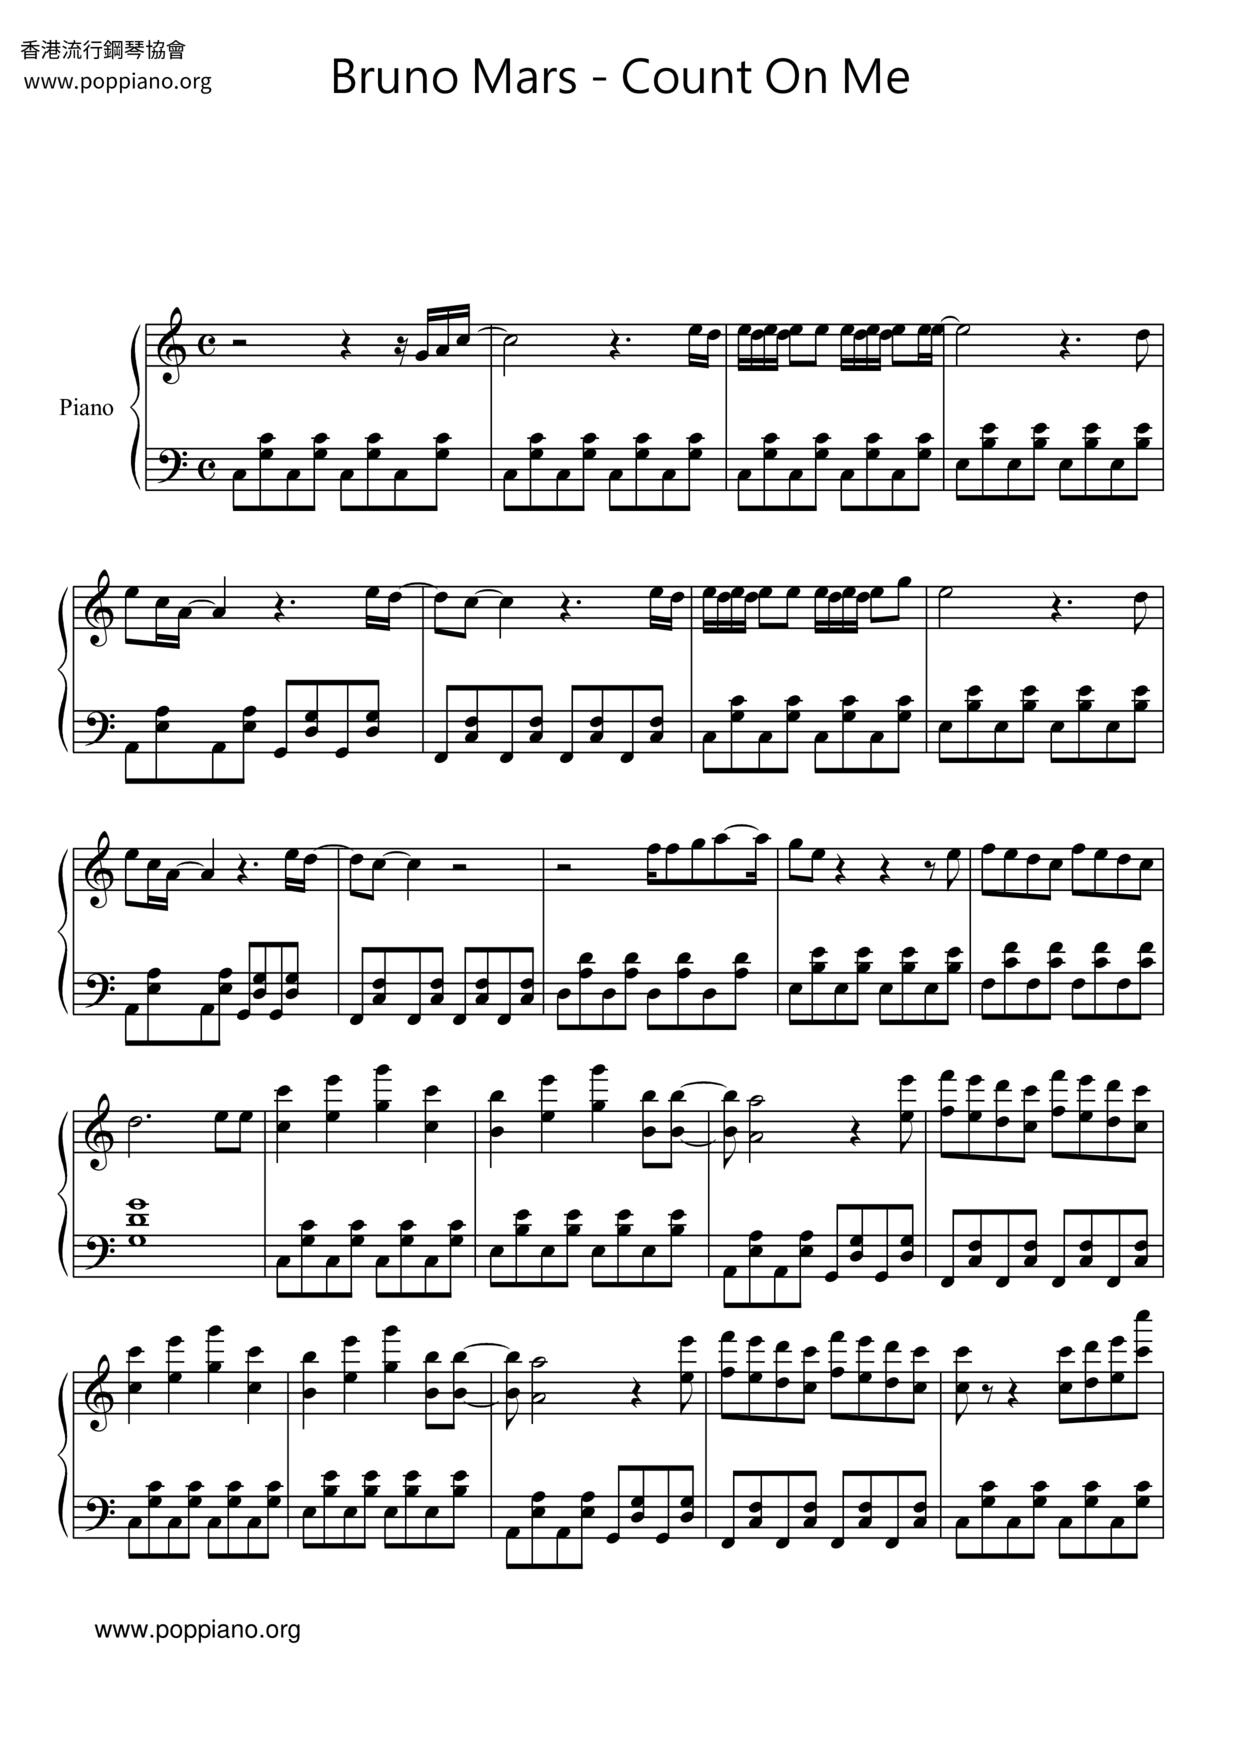 Count On Me Sheet Music Piano Score Free Pdf Download Hk Pop Piano Academy